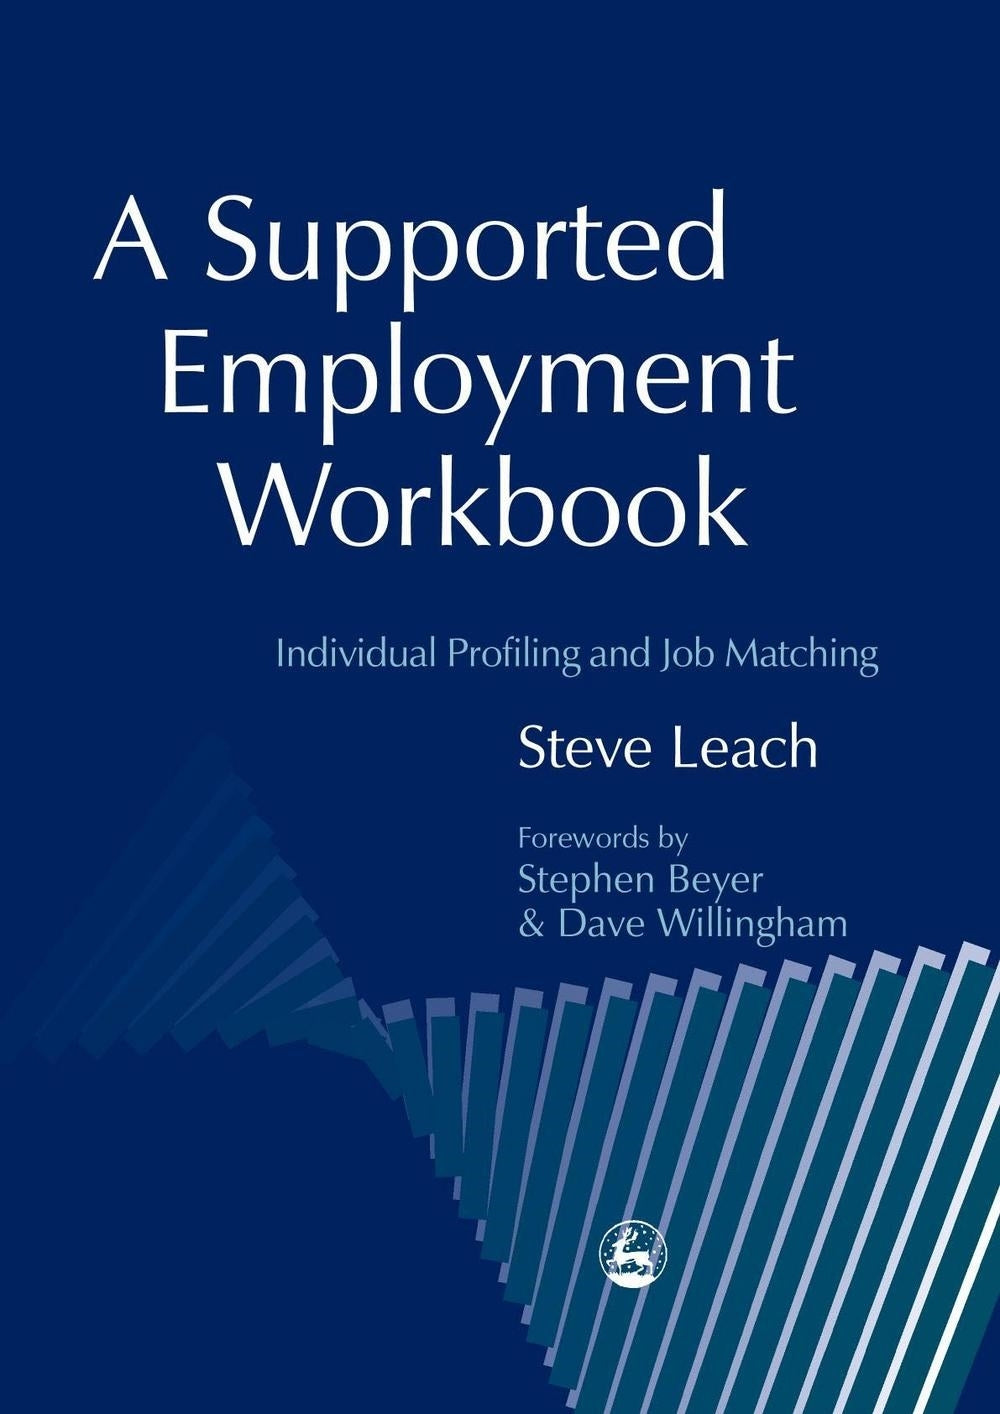 A Supported Employment Workbook by Steve Leach